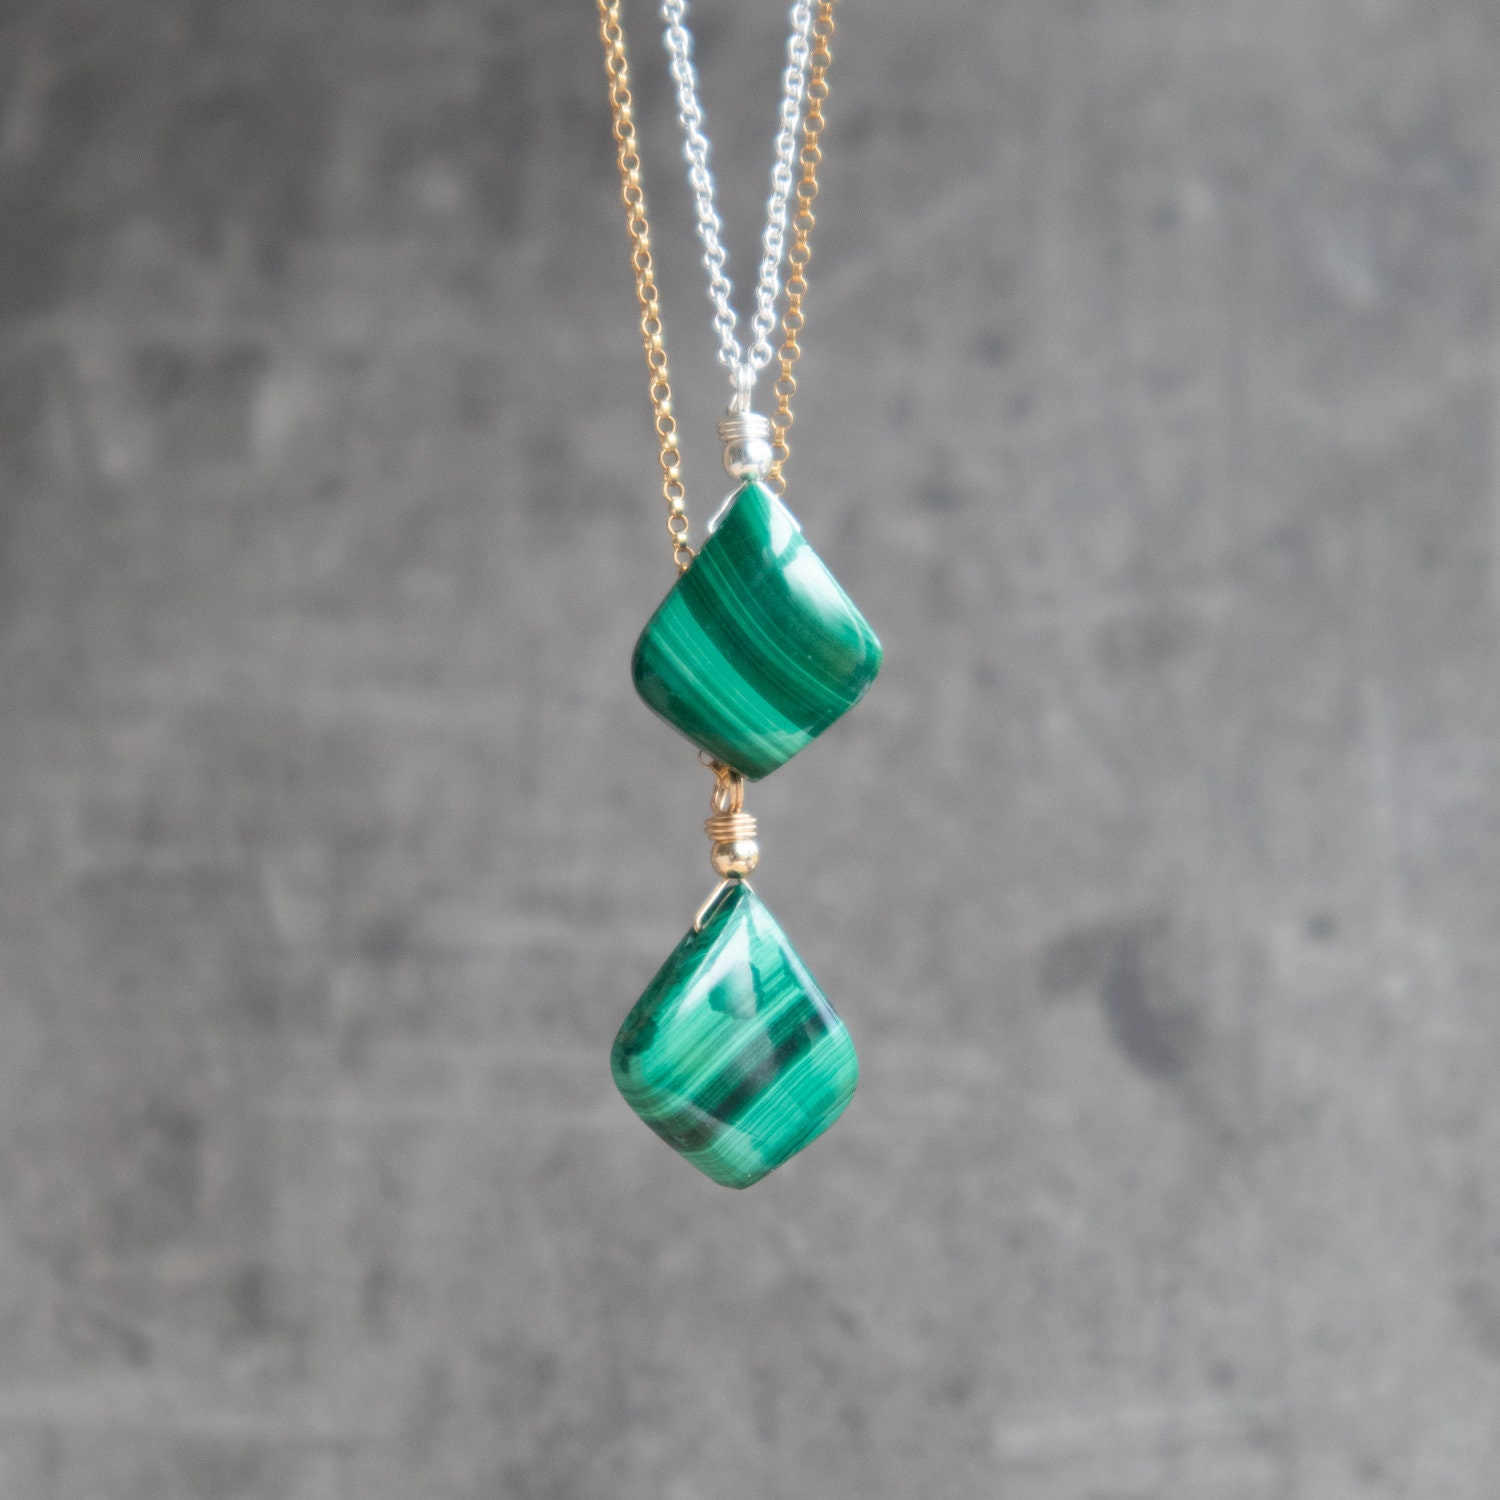 Buy Gold Malachite Necklace, Malachite Pendant, Malachite Jewelry, Malachite  Crystal Necklace, Statement Necklace, Gift for Her Online in India - Etsy